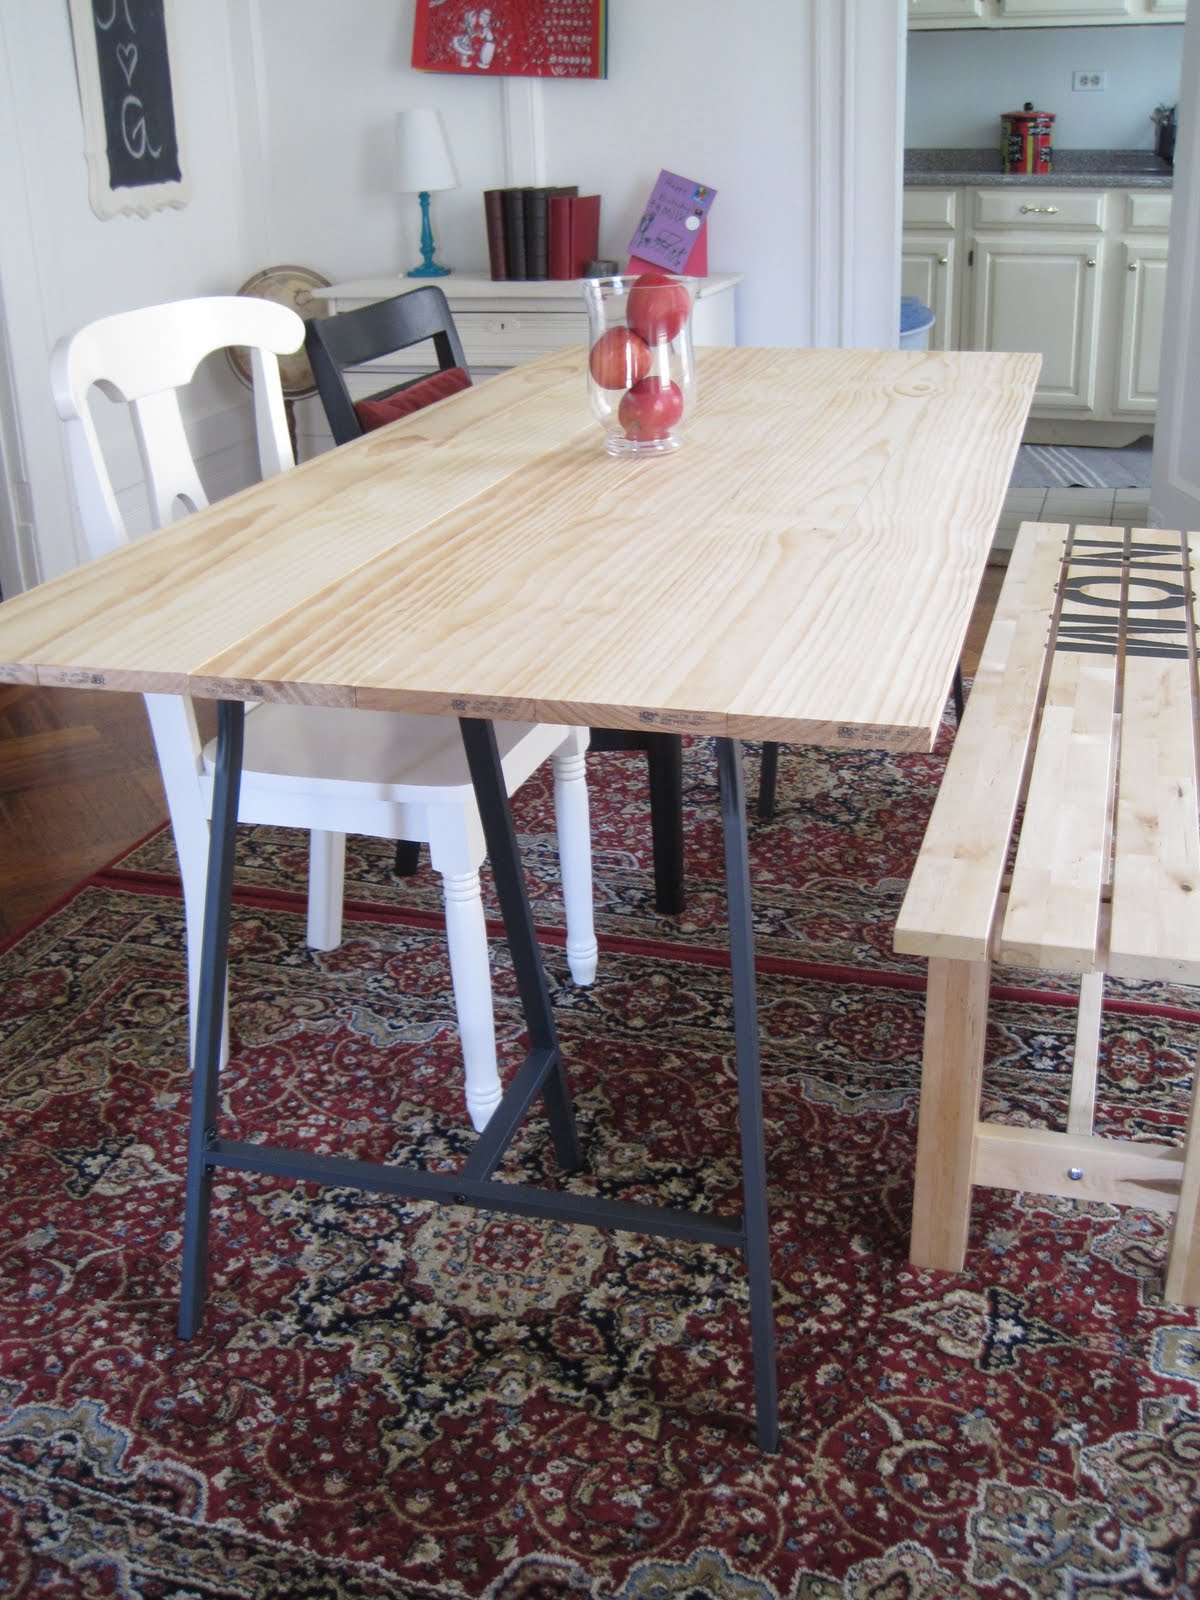 Harlem Home: How To: Build a Dining Room Table for $100